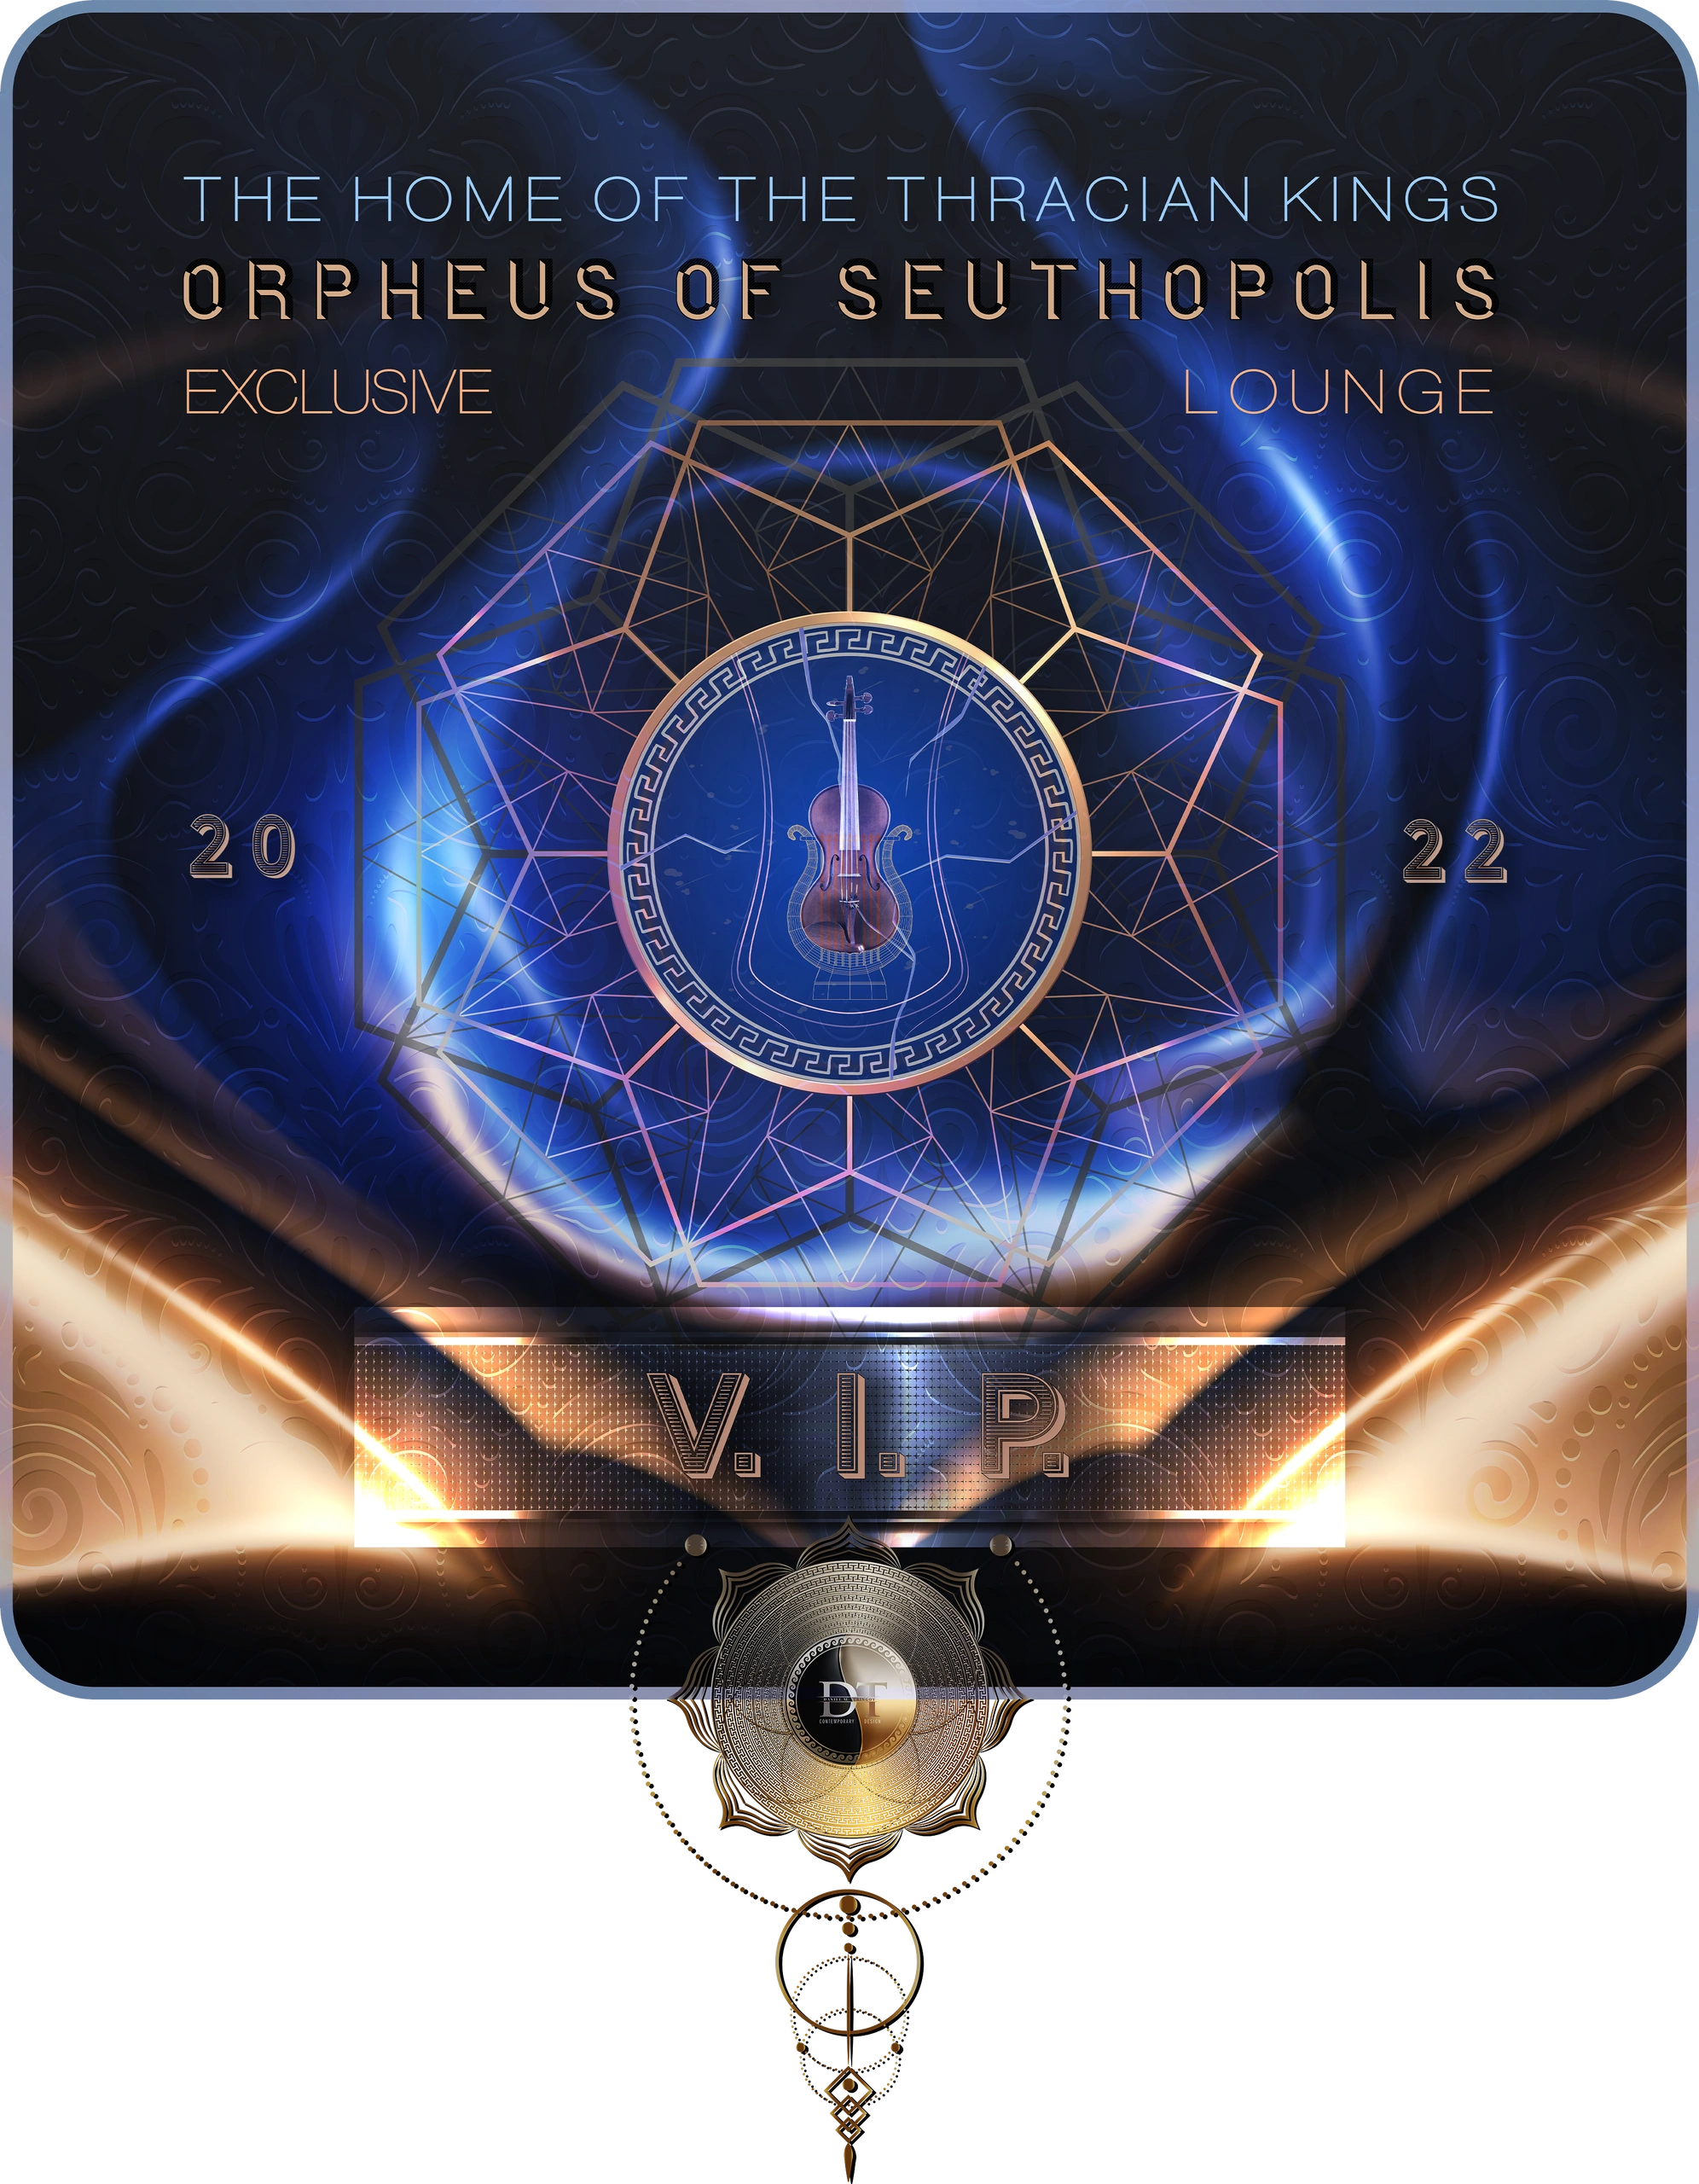 The Home of The Thracian Kings-Orpheus of Seuthopolis Exclusive Lounge 2022